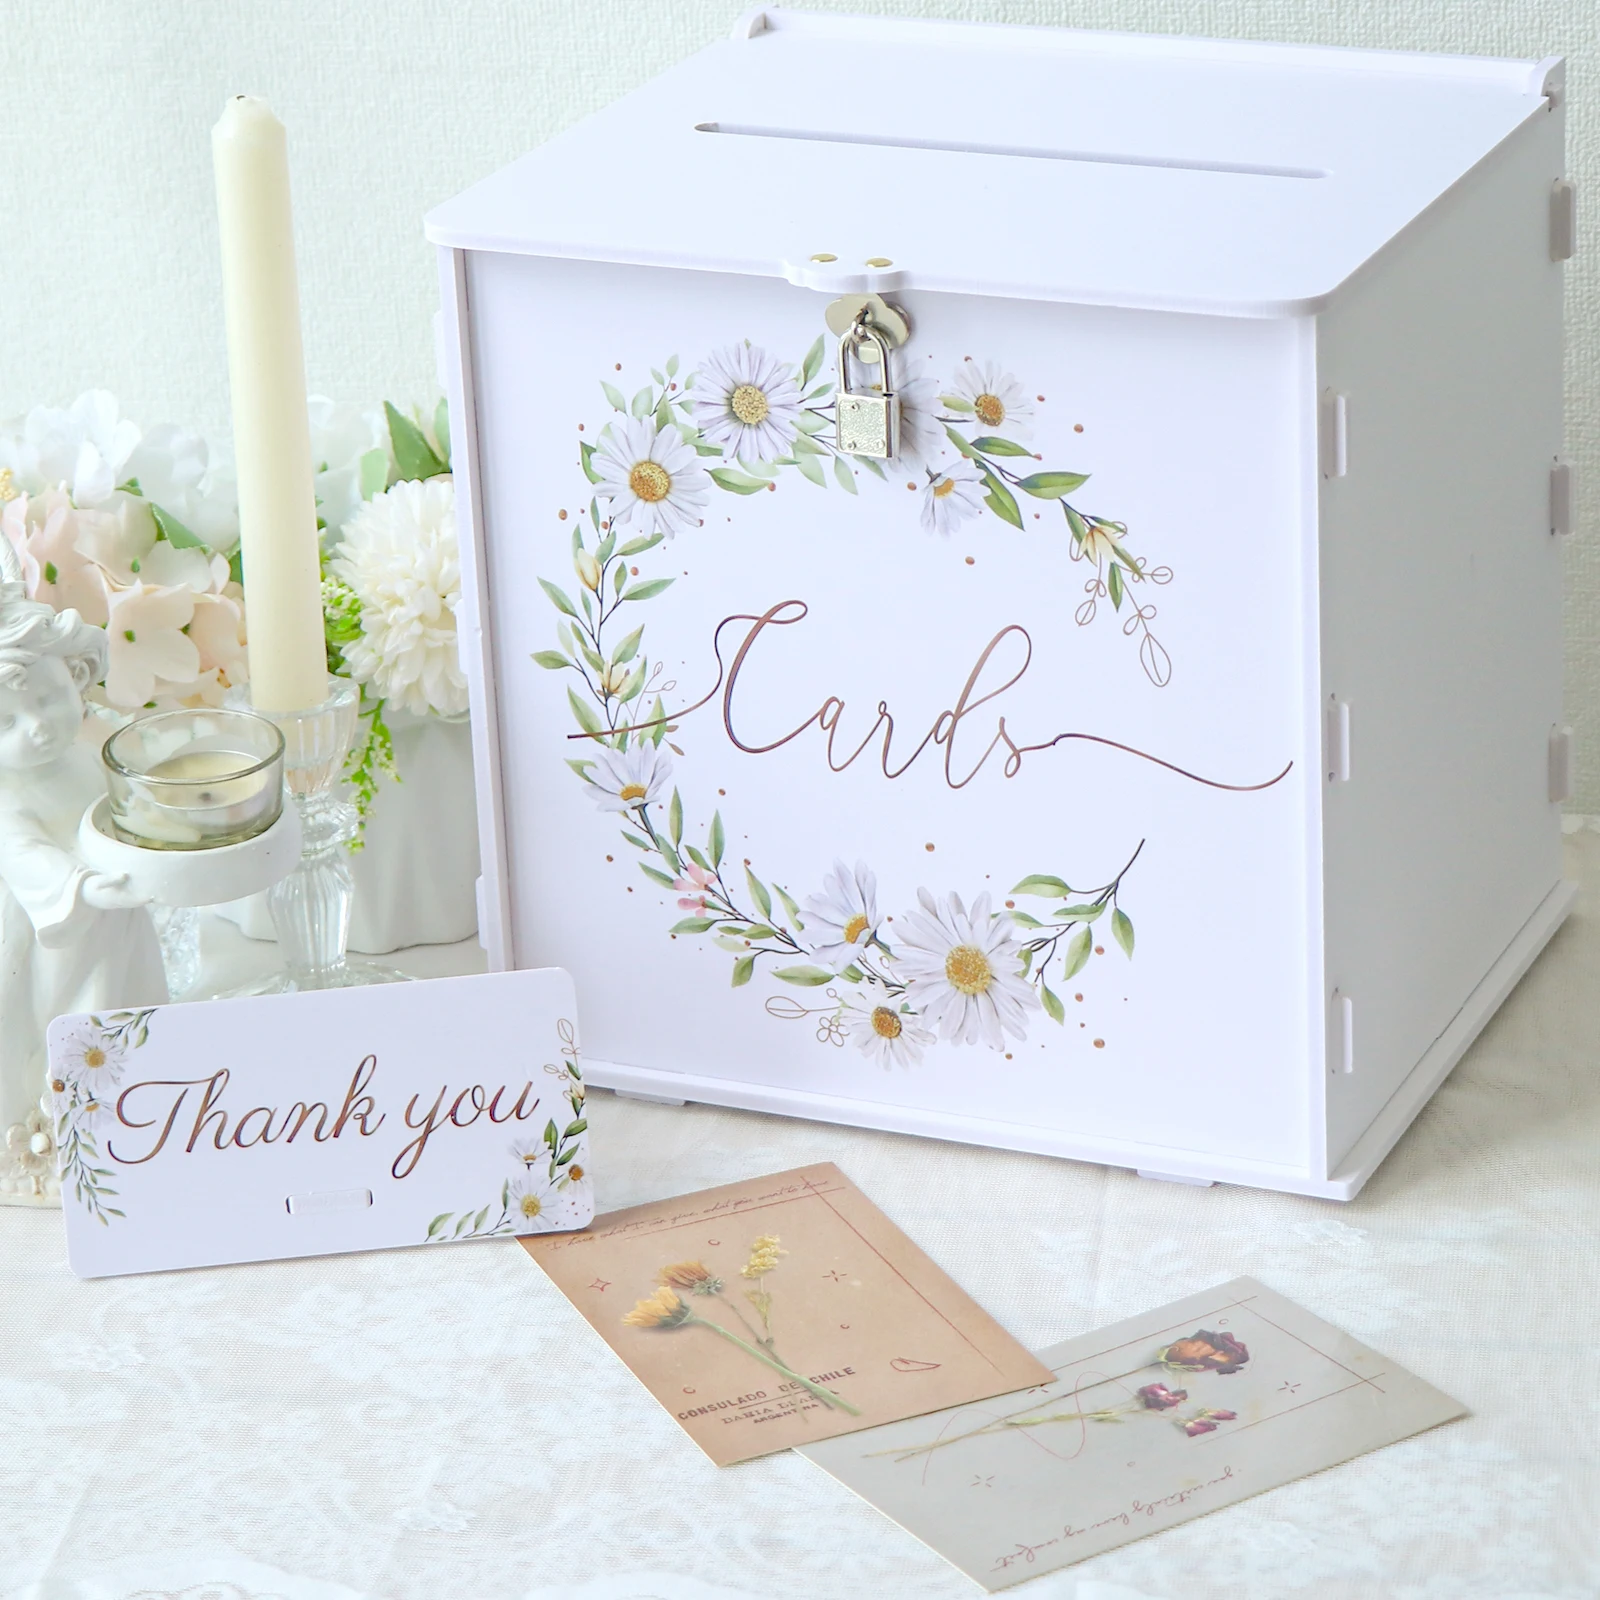 

OurWarm White Wedding Card Box with Lock PVC Gift Box for Wedding Reception Daisy Envelope Money Card Box for Baby Shower Decor